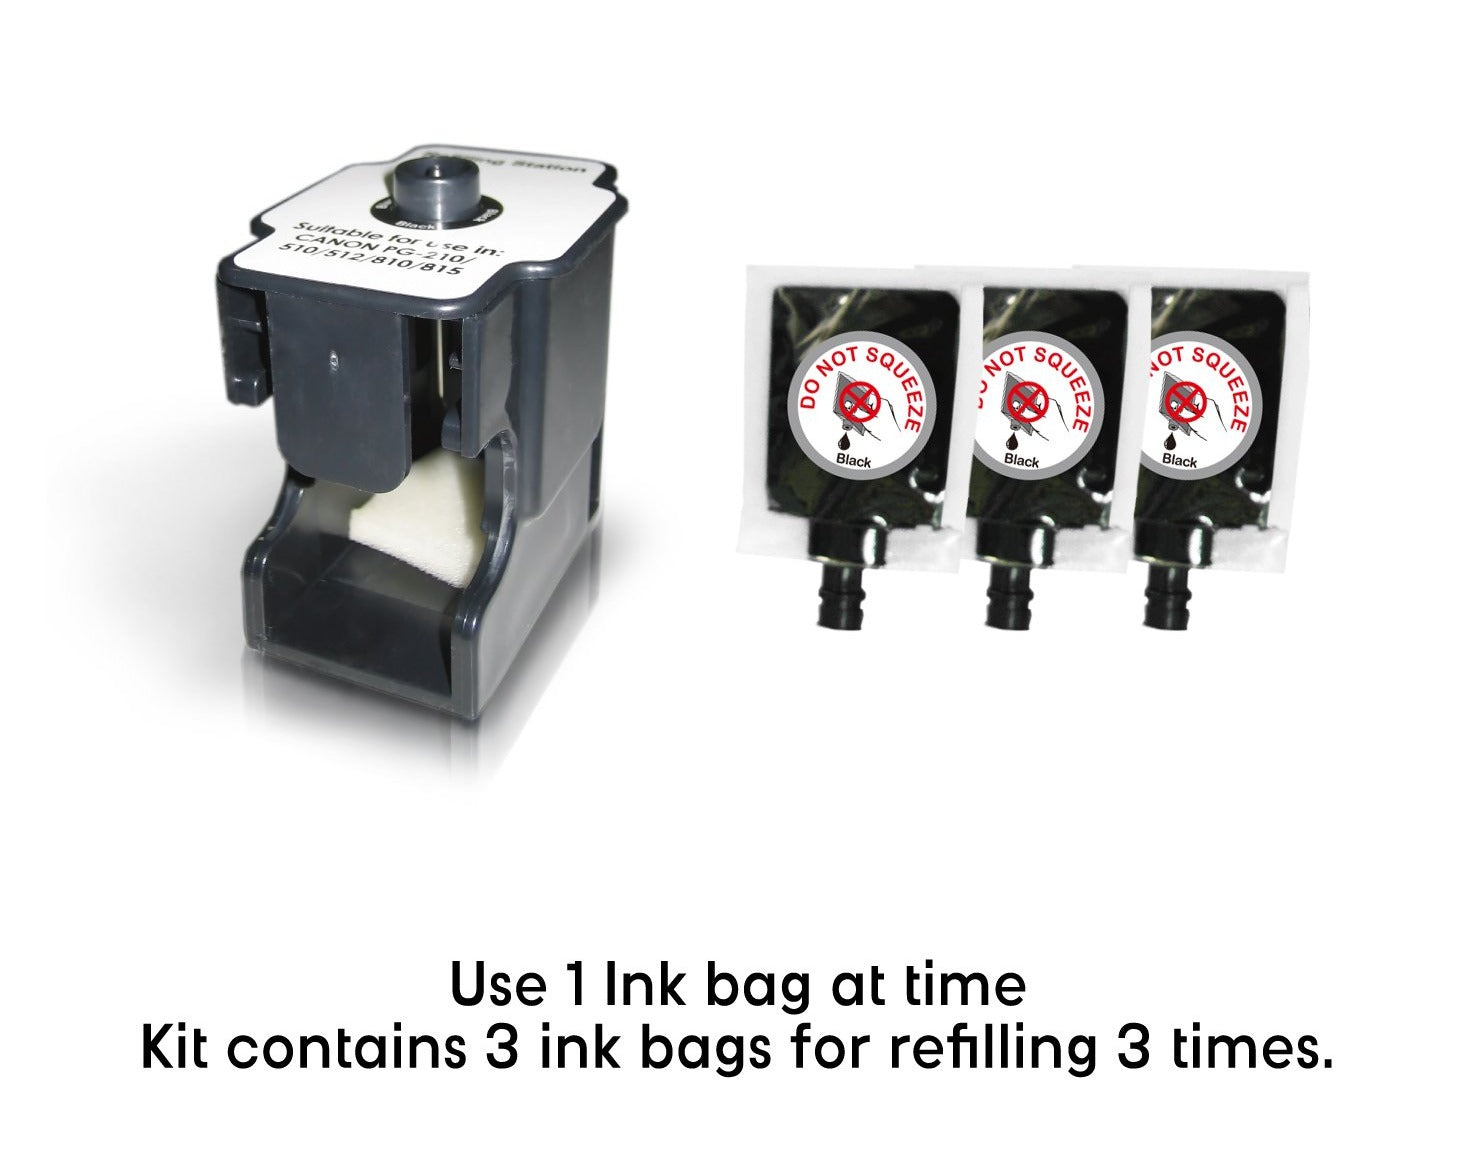 Refill kit for 123 Black Ink Cartridge - Can be refilled 9 times with this Kit